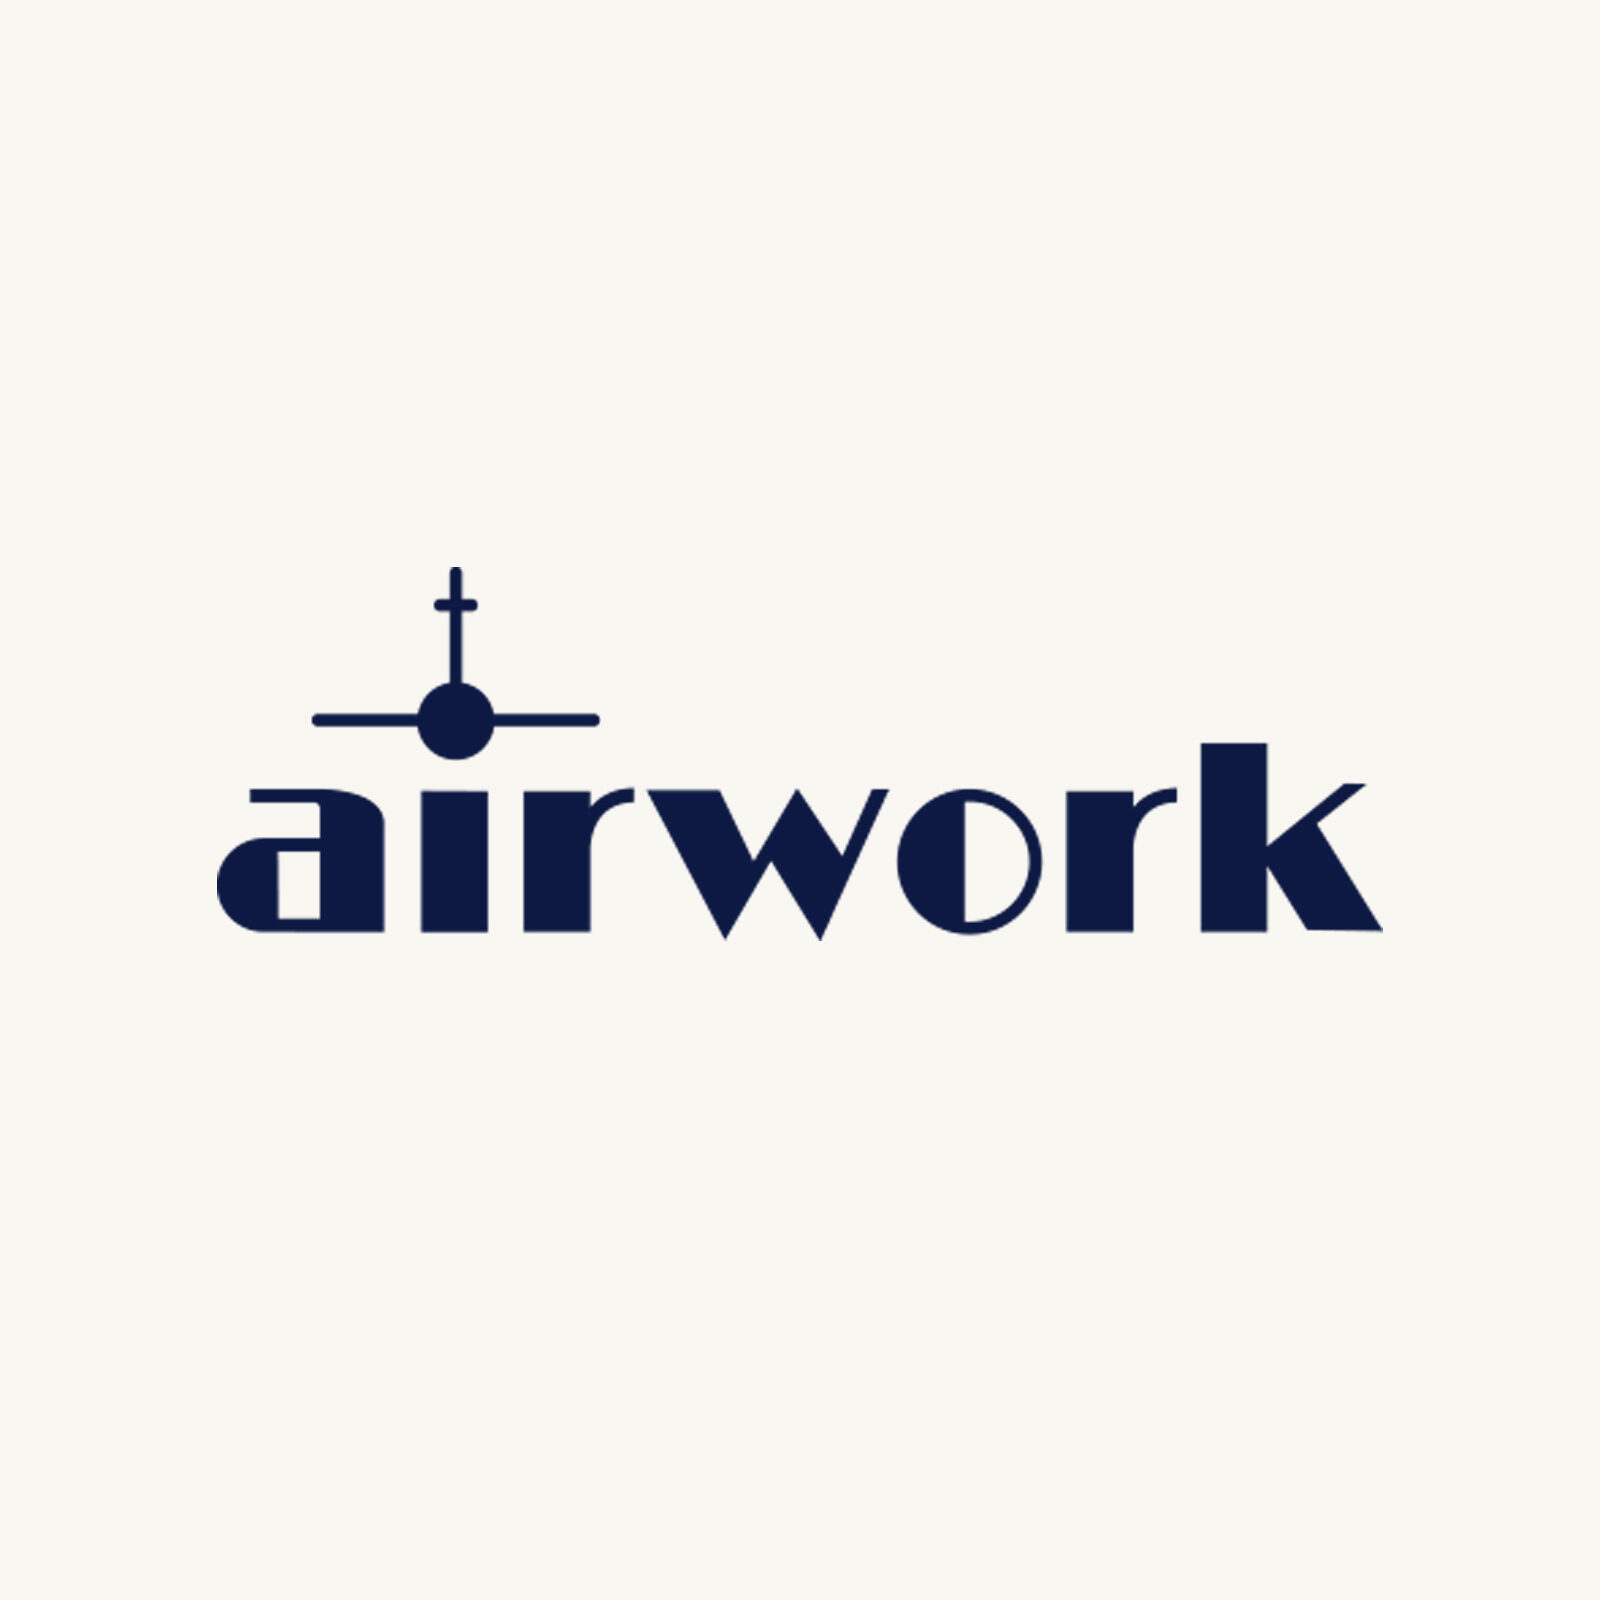 Matt Bagshaw recently appointed as Chief People Officer at Airwork Group